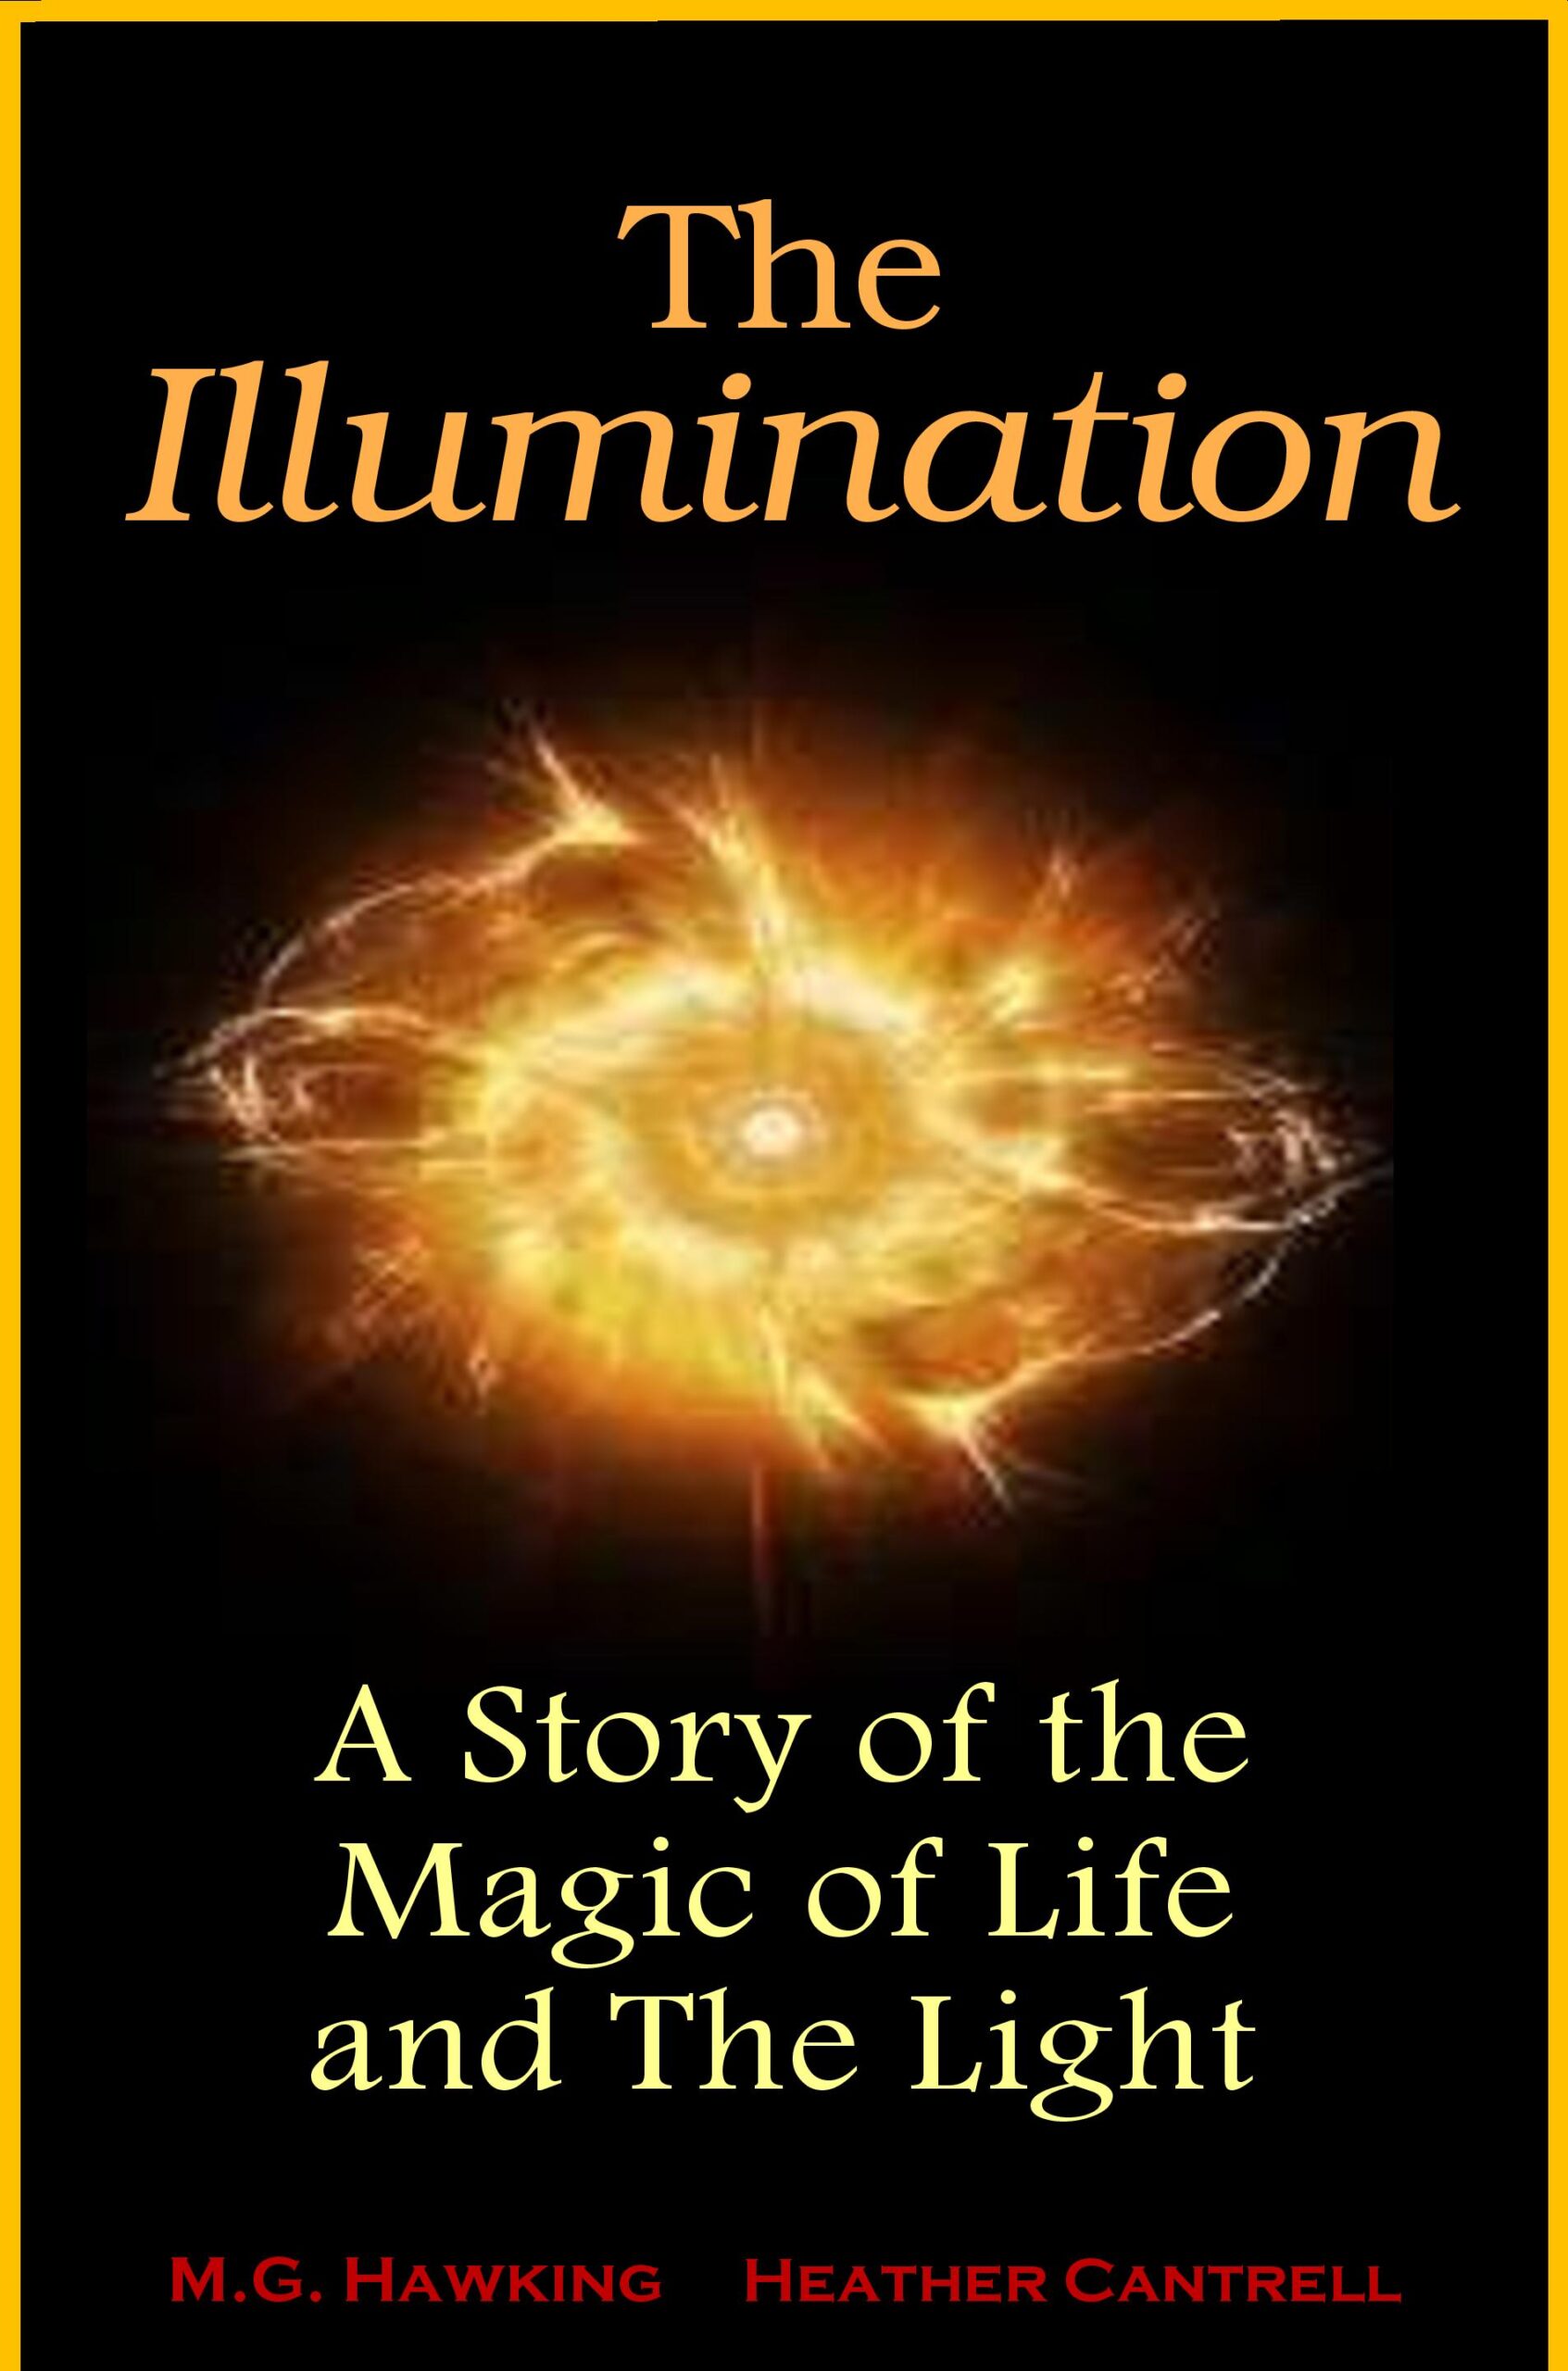 FREE: The Illumination, A Story of the Magic of Life and The Light by Michael Hawking